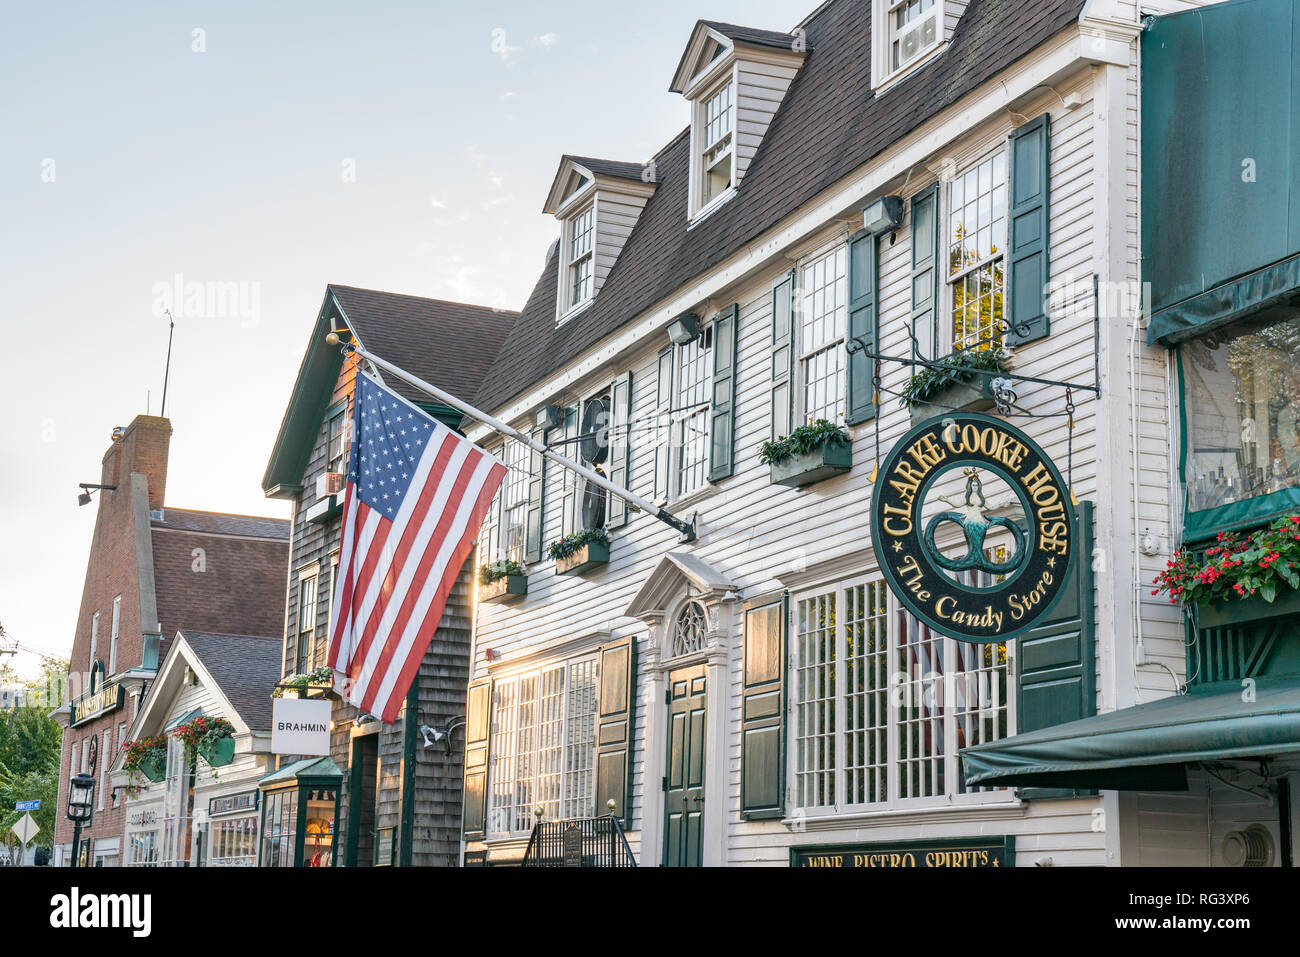 NEWPORT, CT - SEPTEMBER 30, 2018: Bowen's Wharf, historic shopping and dining destination in Newport Harbor Stock Photo